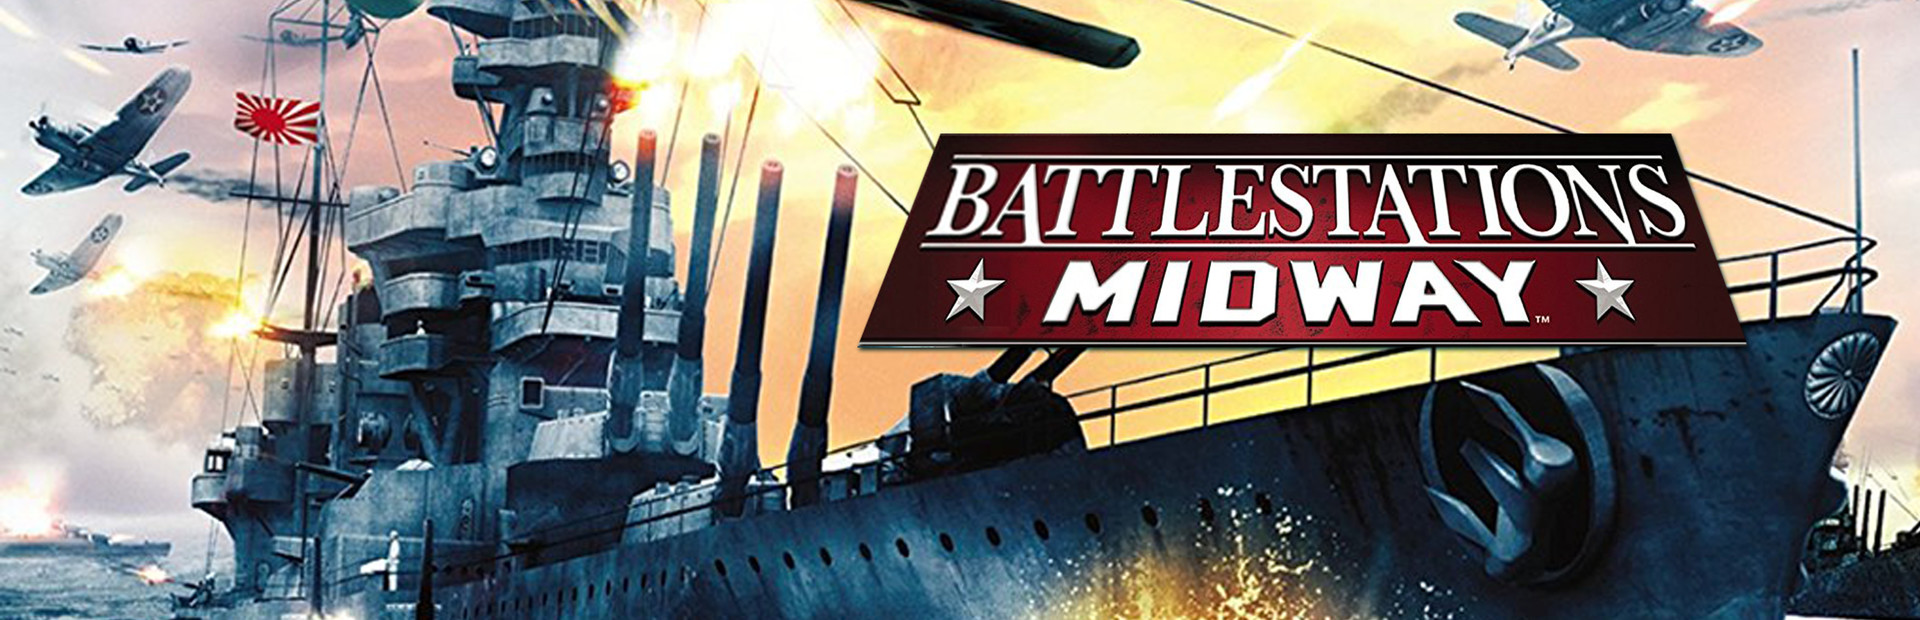 Battlestations: Midway cover image